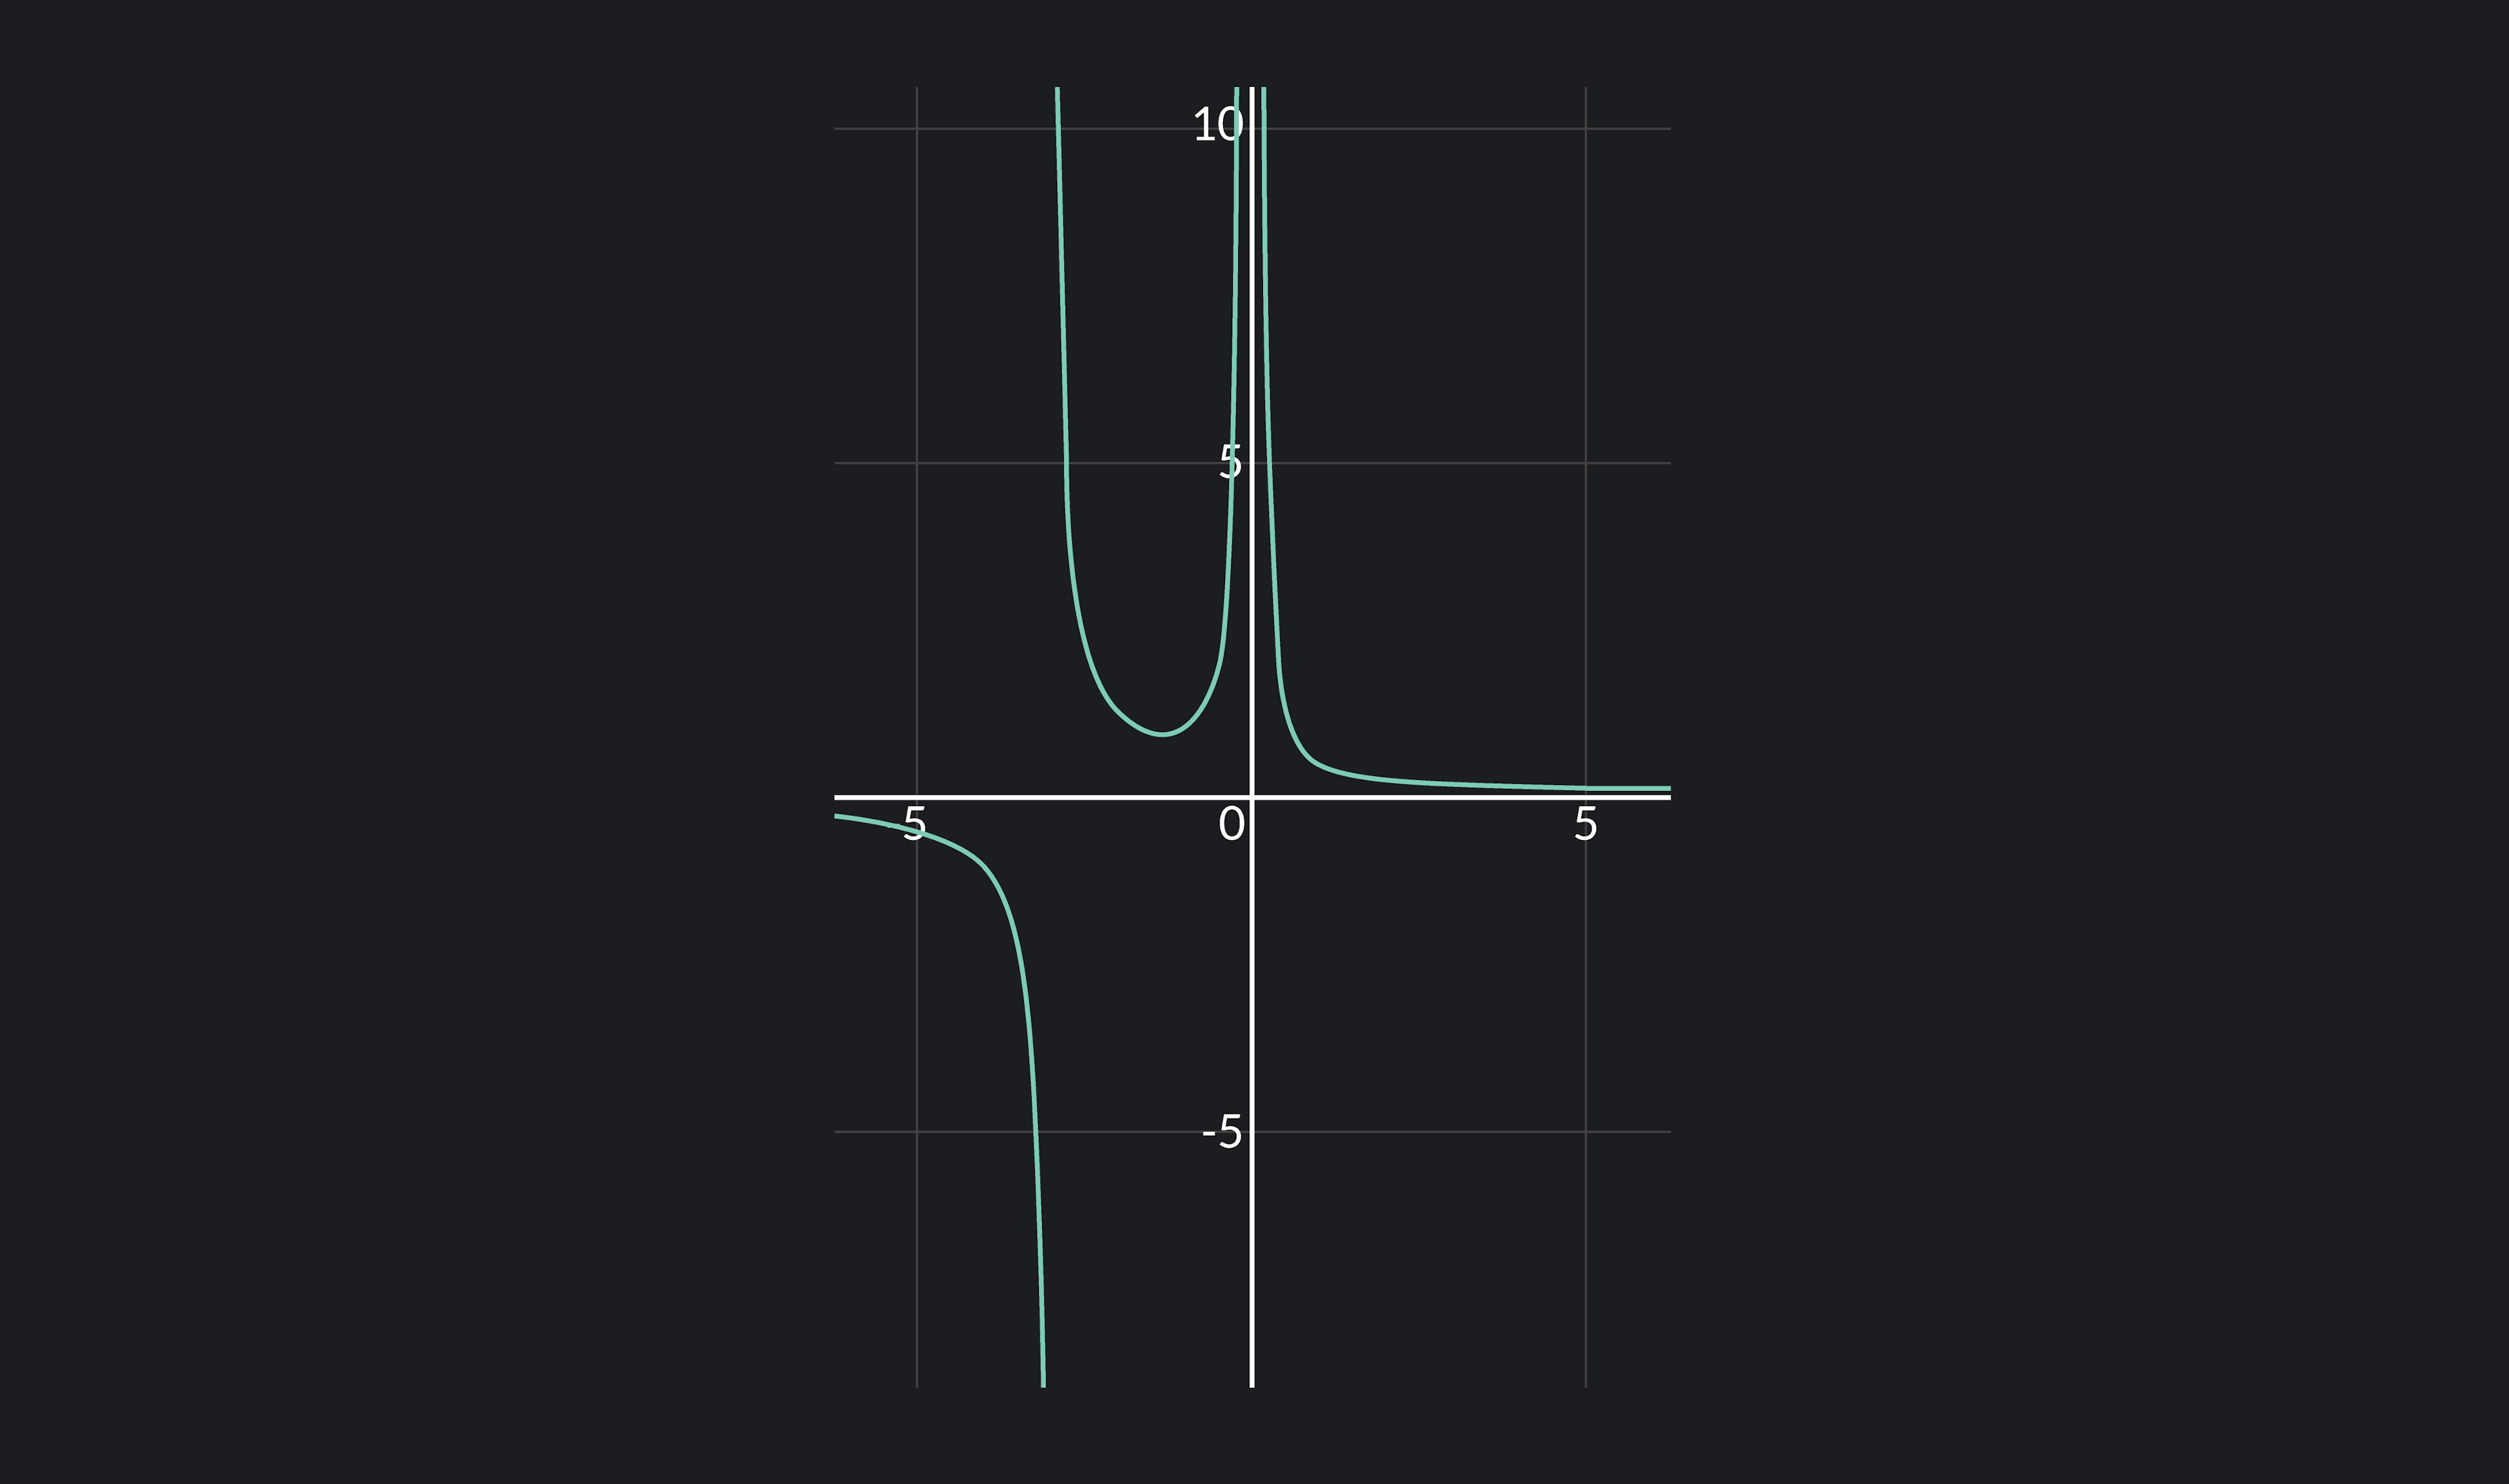 Graph showing an infinite discontinuity